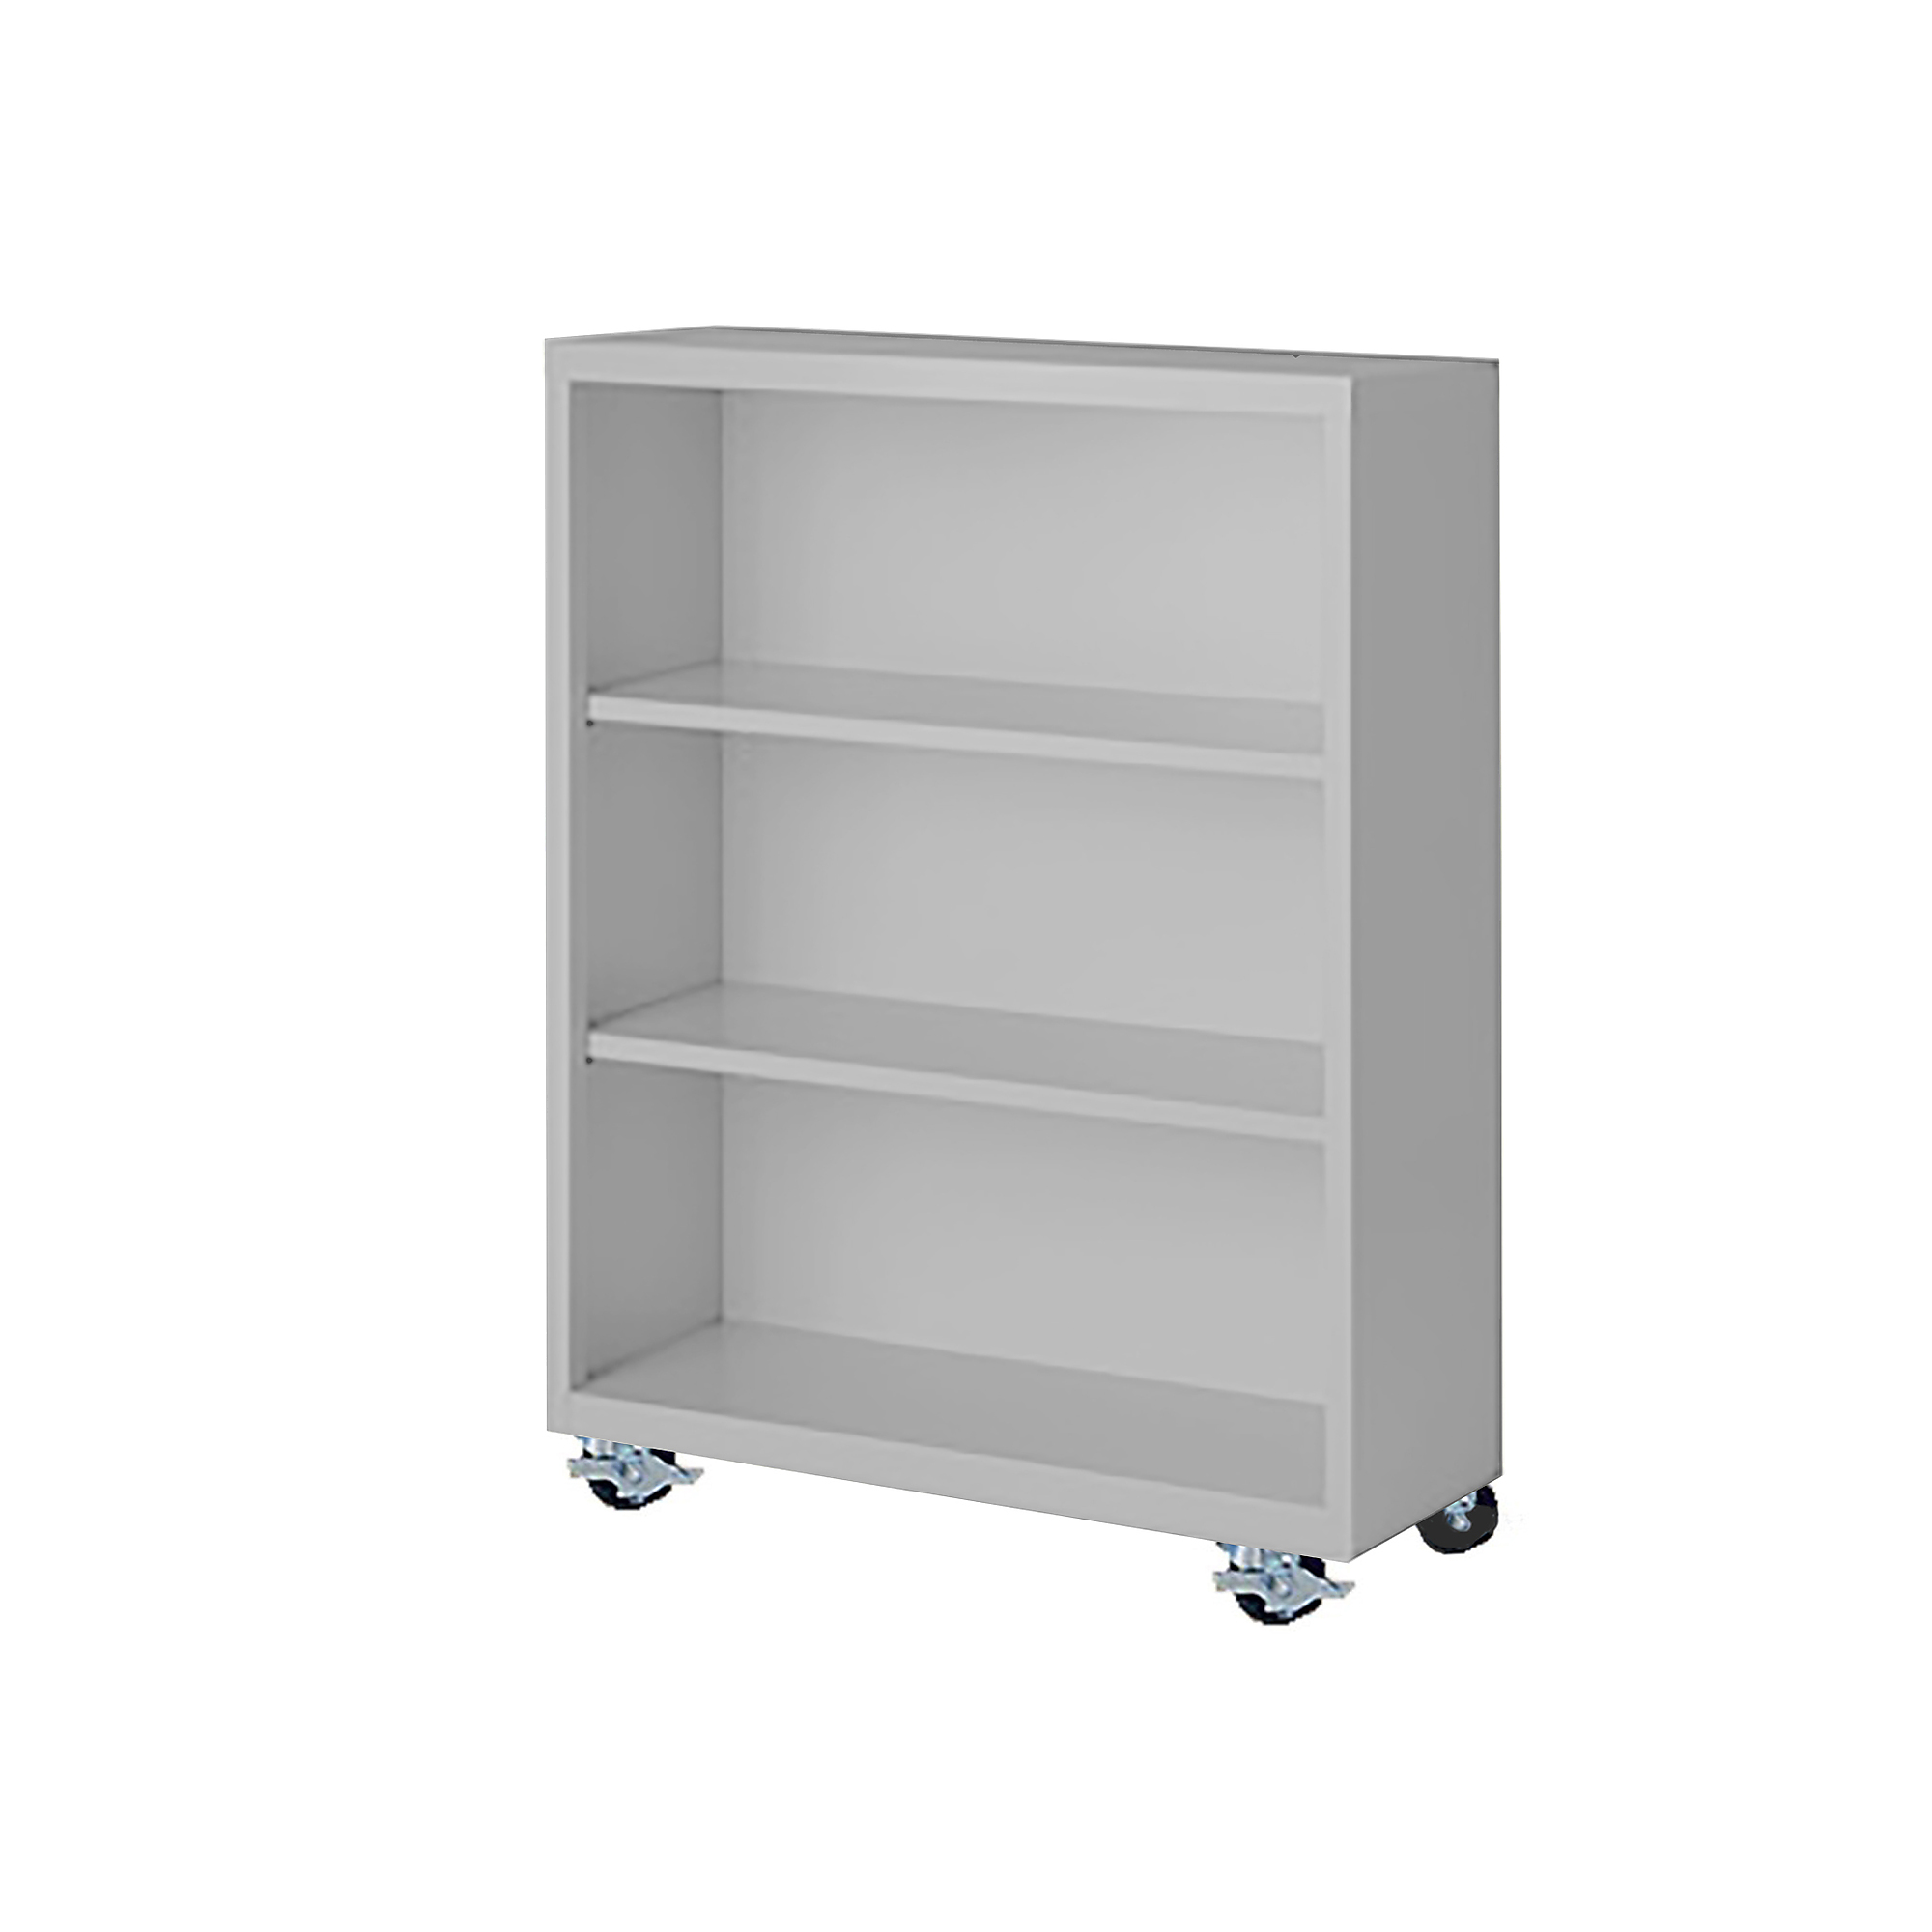 Steel Cabinets USA, 36Inchx18Inchx45Inch Gray Mobile Bookcase Fully Assembled, Height 45 in, Shelves (qty.) 3, Material Steel, Model MBCA-364518-G